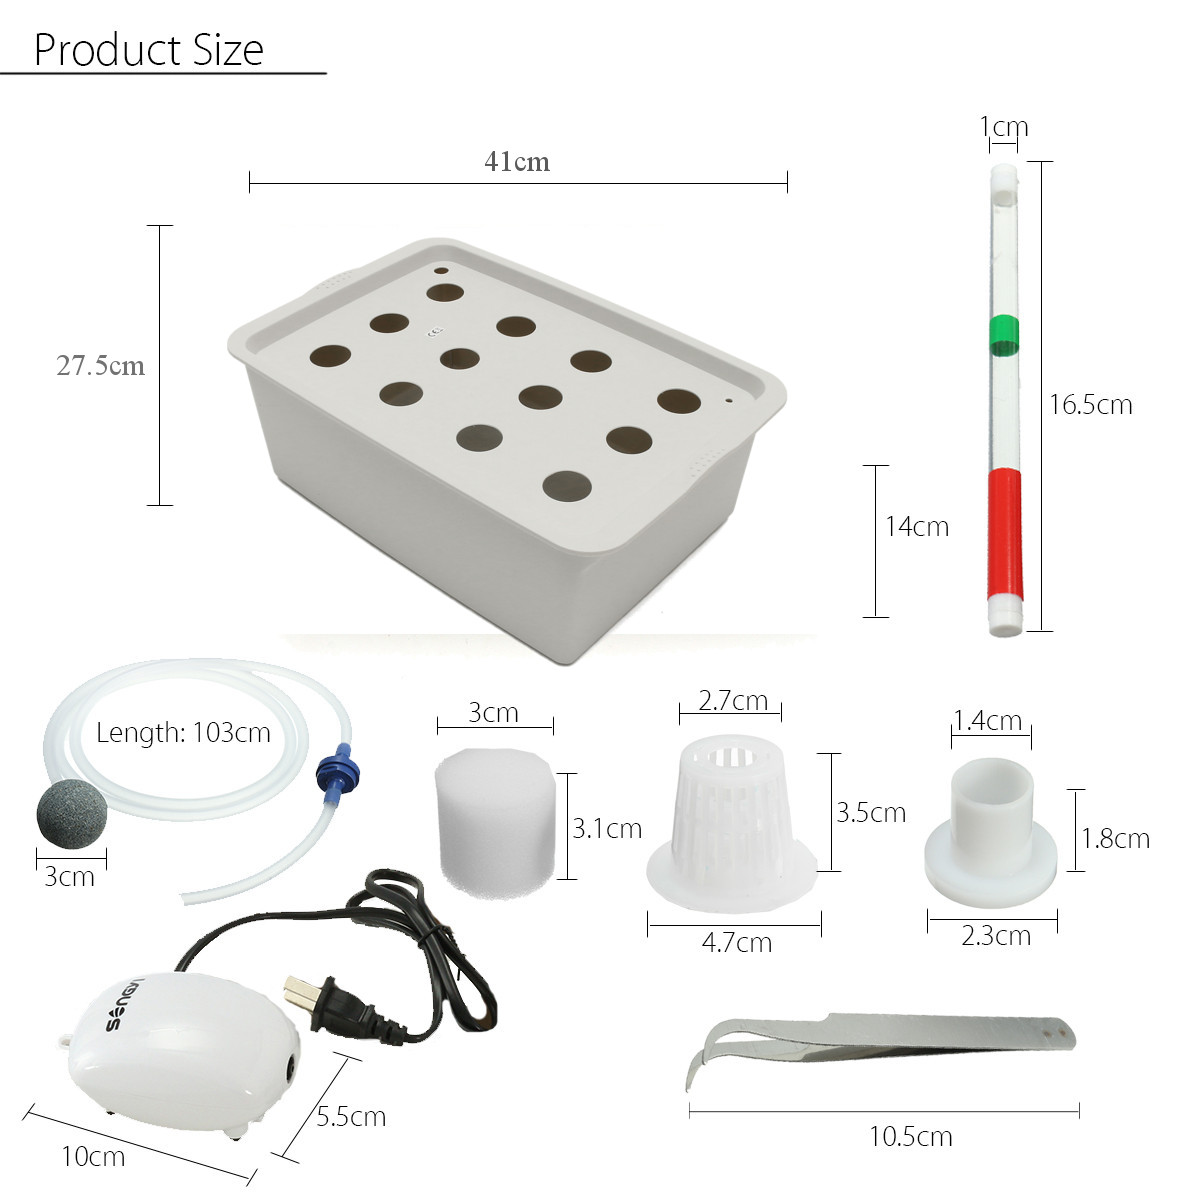 220V-Hydroponic-System-Kit-12-Holes-DWC-Soilless-Cultivation-Indoor-Water-Planting-Grow-Box-1186050-2